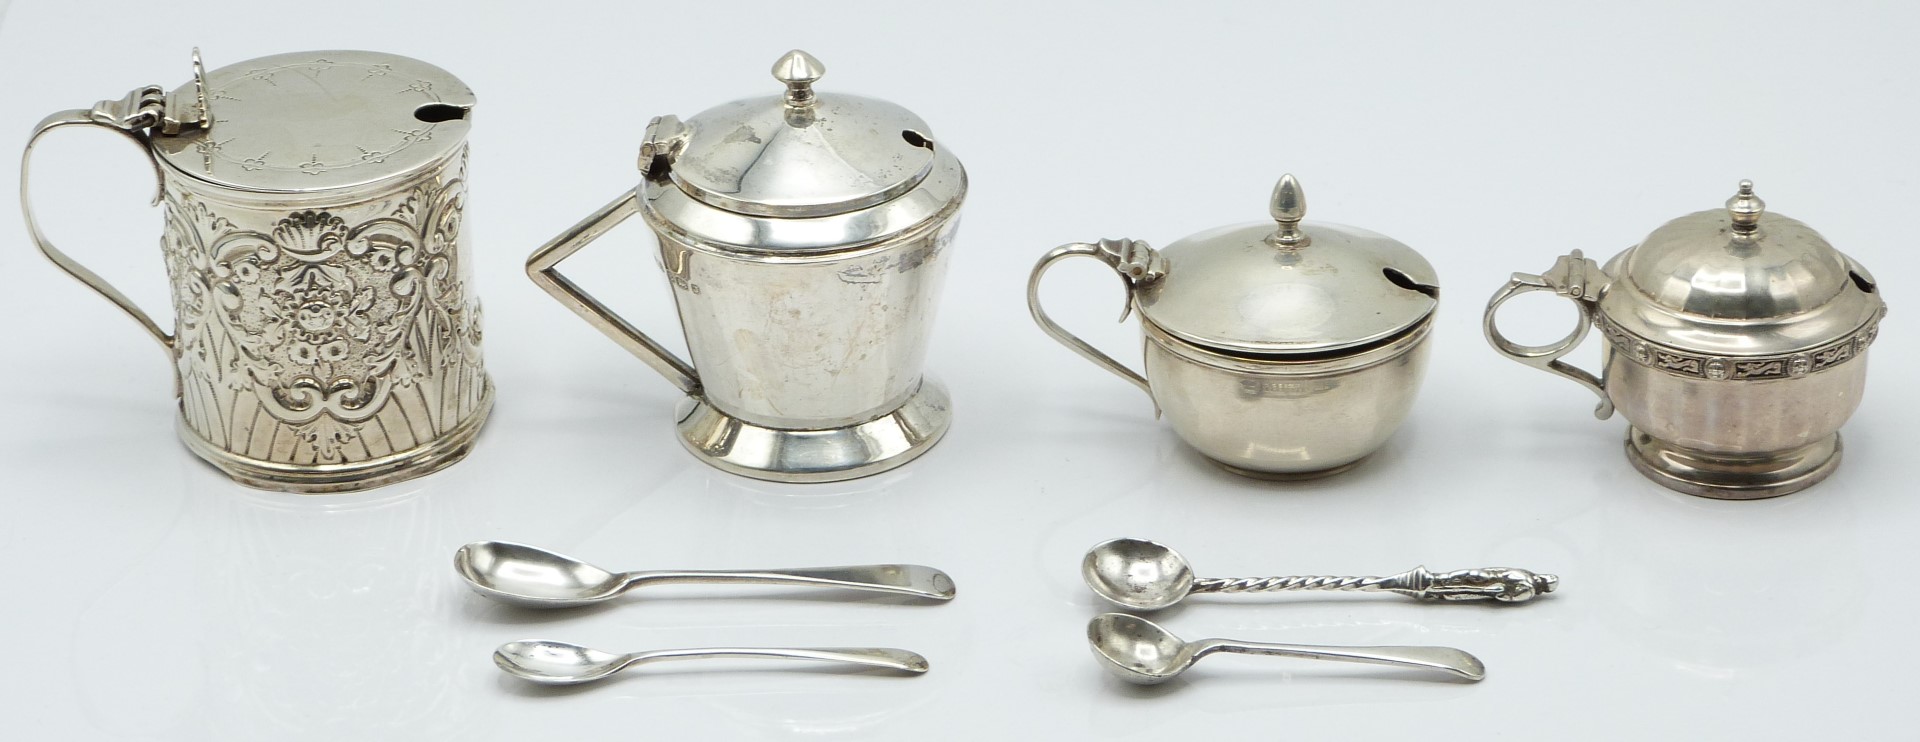 Four various Victorian and later hallmarked silver mustards, London 1898, Birmingham 1934 and 1933